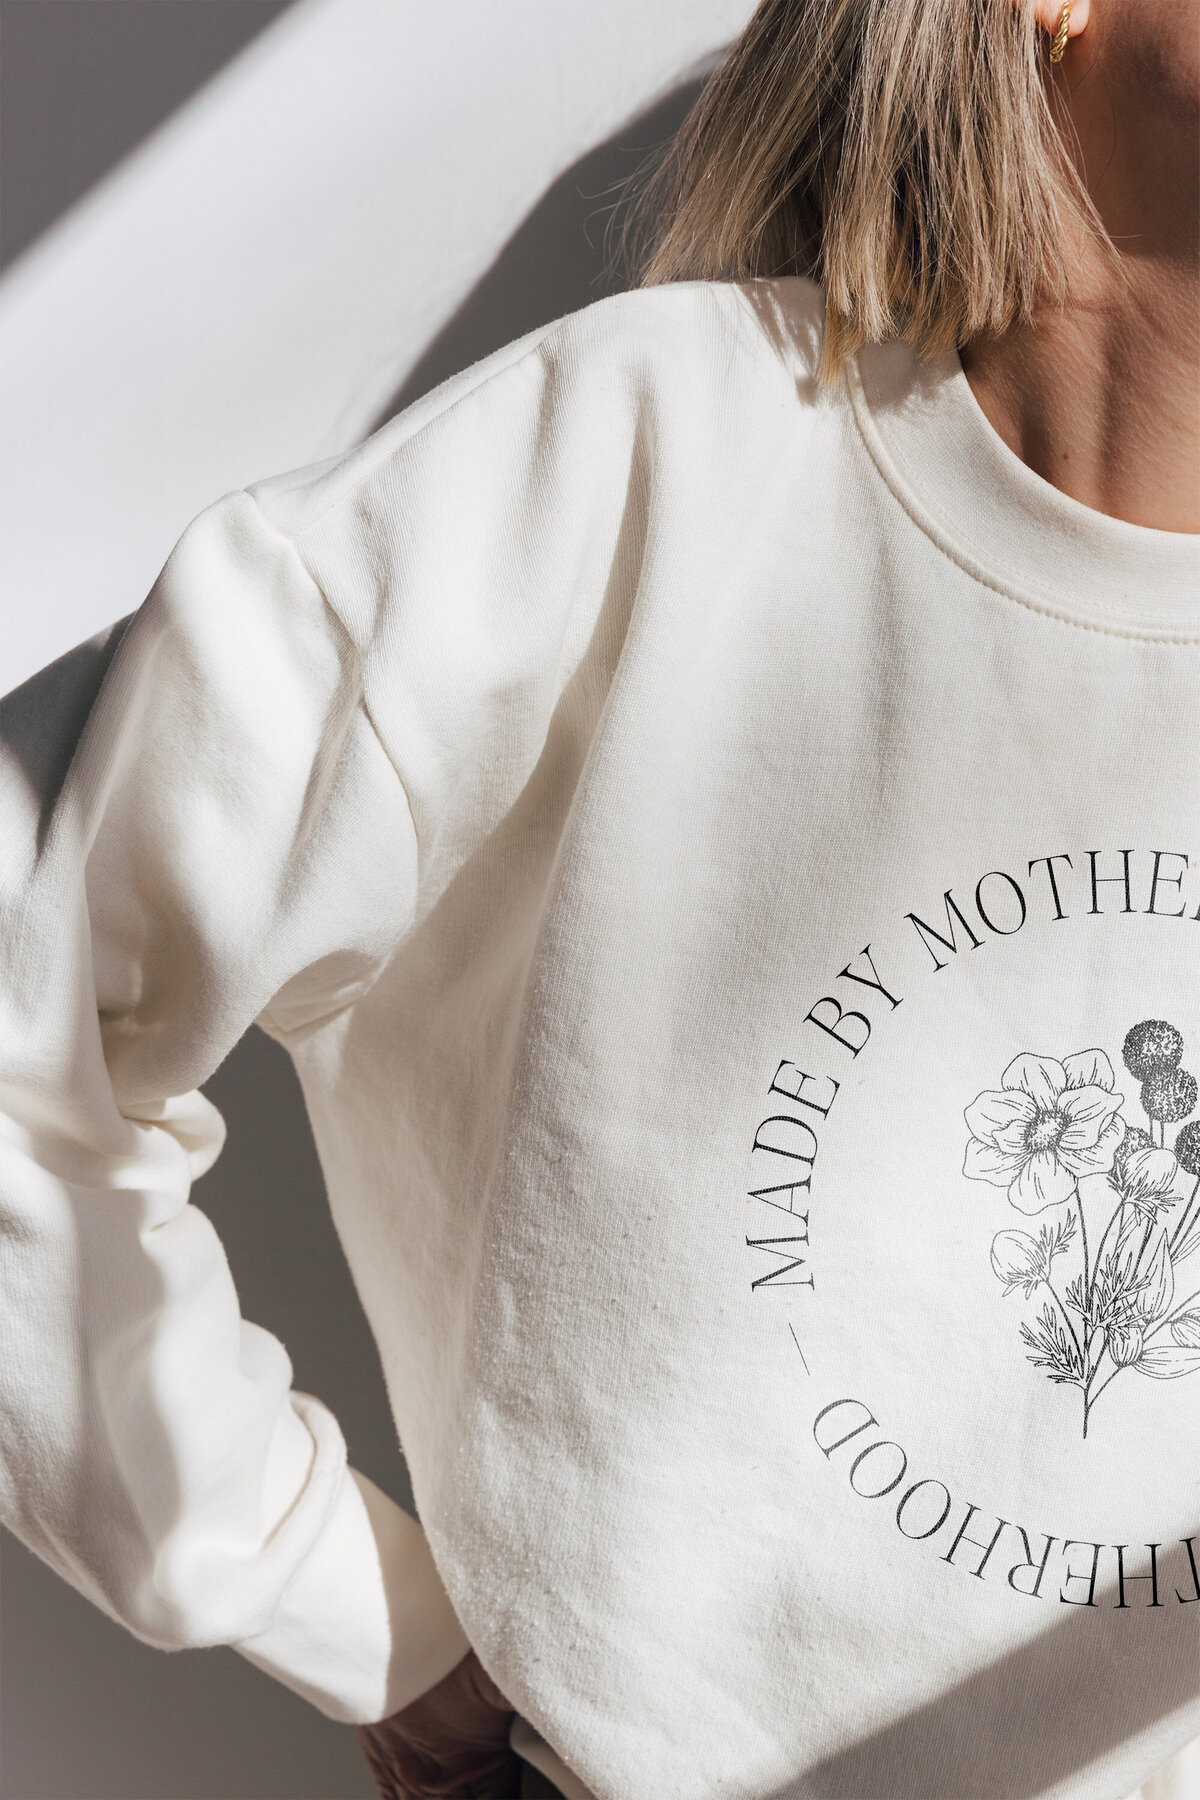 Apparel for Moms, Mothers, Motherhood, Mamas, Mother's Day, Gifts, Gift Ideas, Postpartum - Sweatshirt by Made by Motherhood by Kelly Zugay